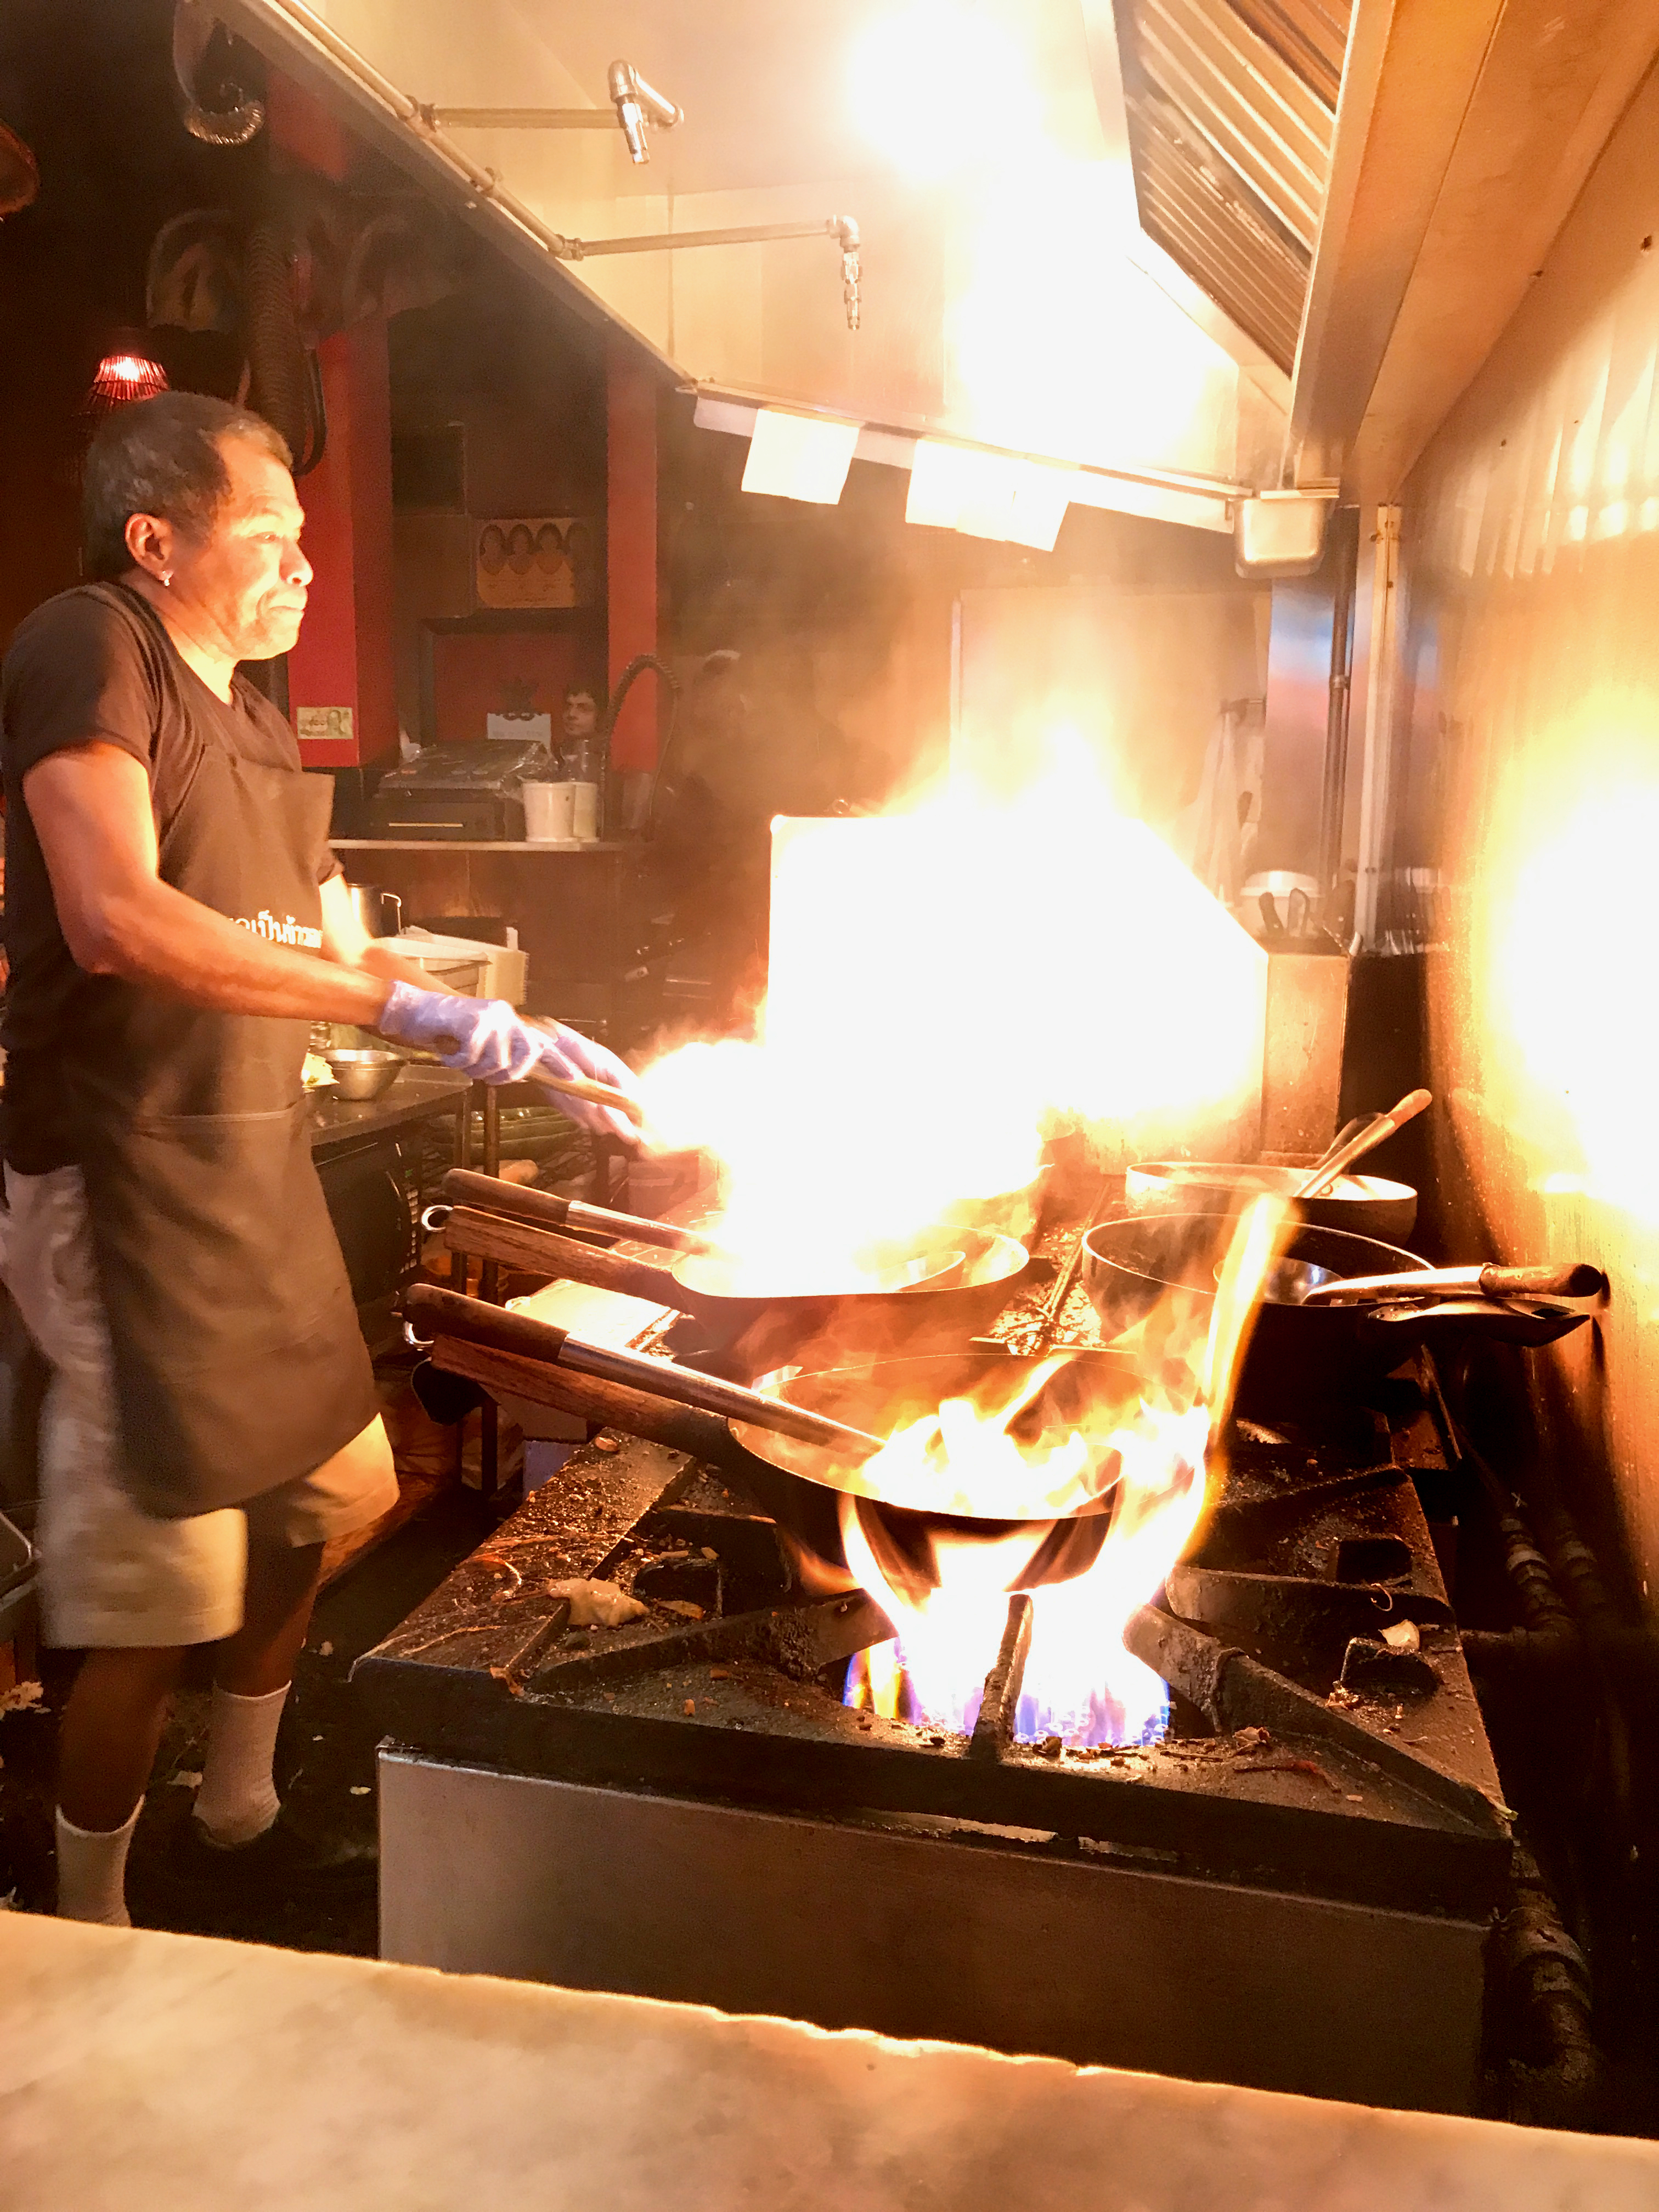 Day 14. <i>Warmth</i>. Dinner in the making at our favorite local Thai restaurant.